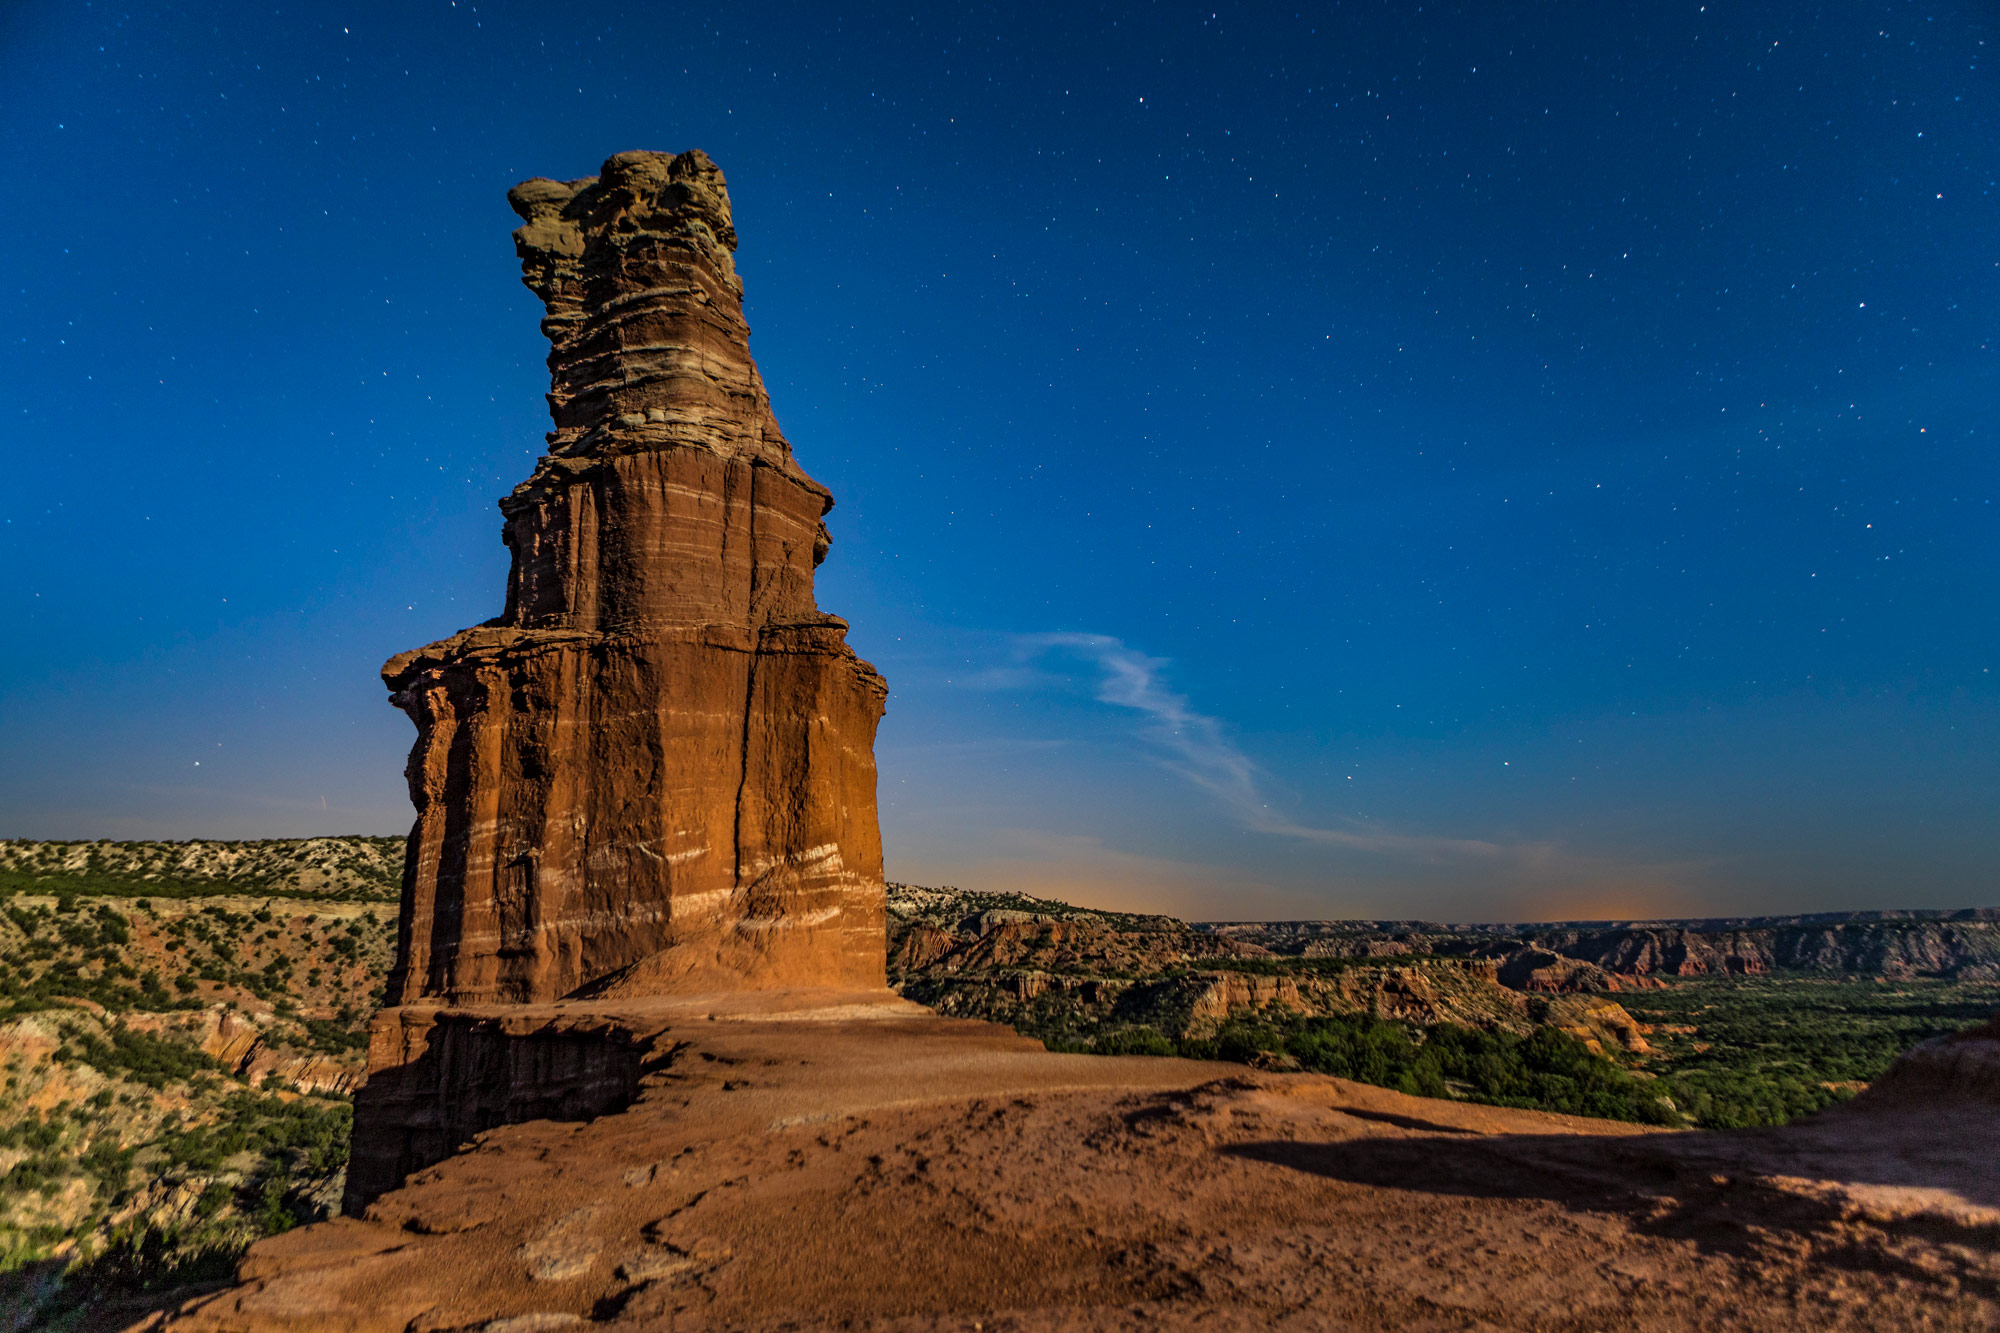 Lighthouse rock formation with stars - Palo Duro Canyon, Texas